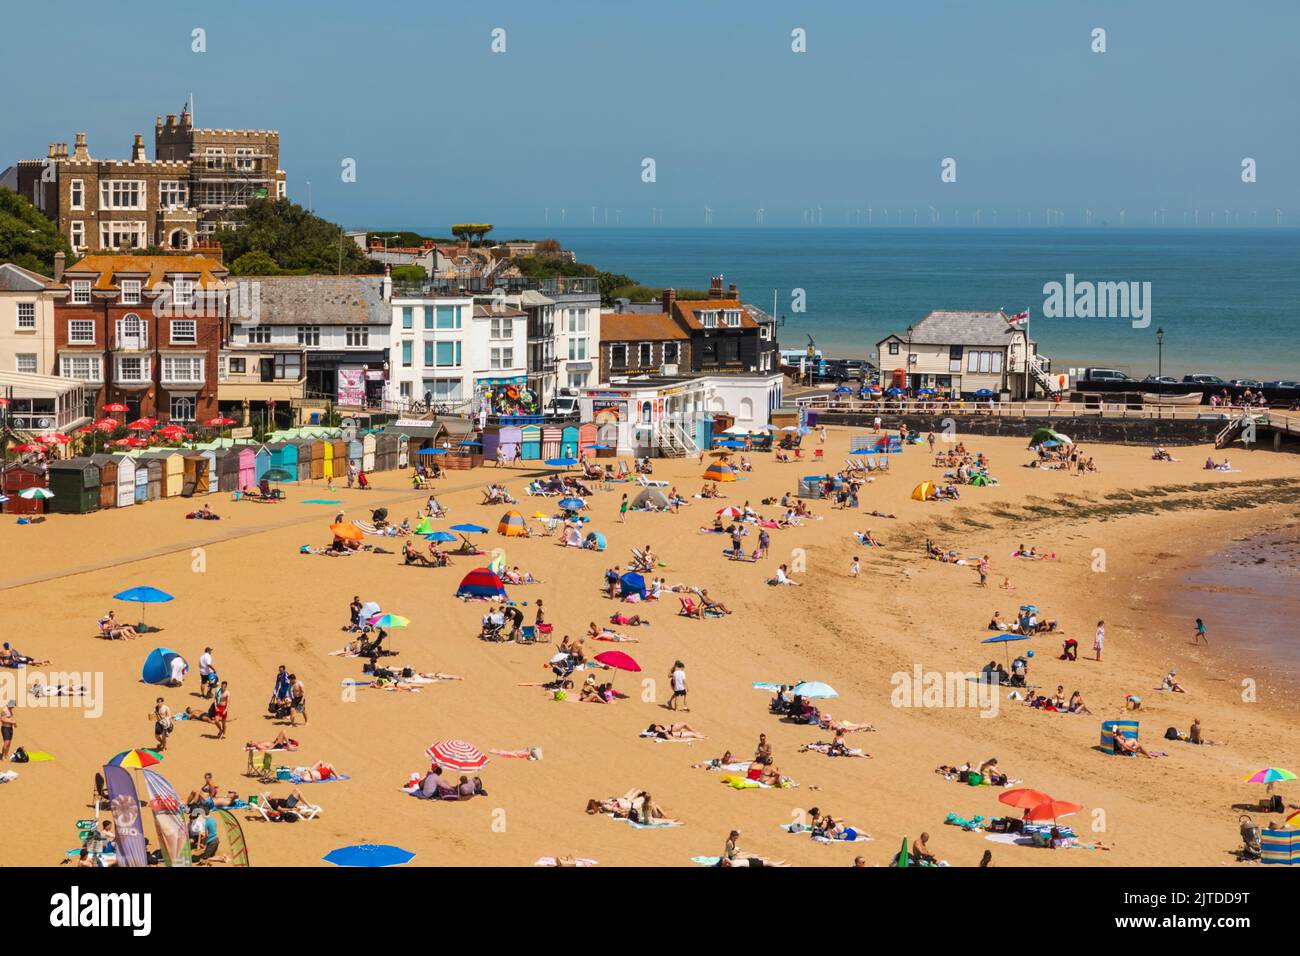 England, Kent, Broadstairs, High Angle View of Broadstairs Beach Stock Photo